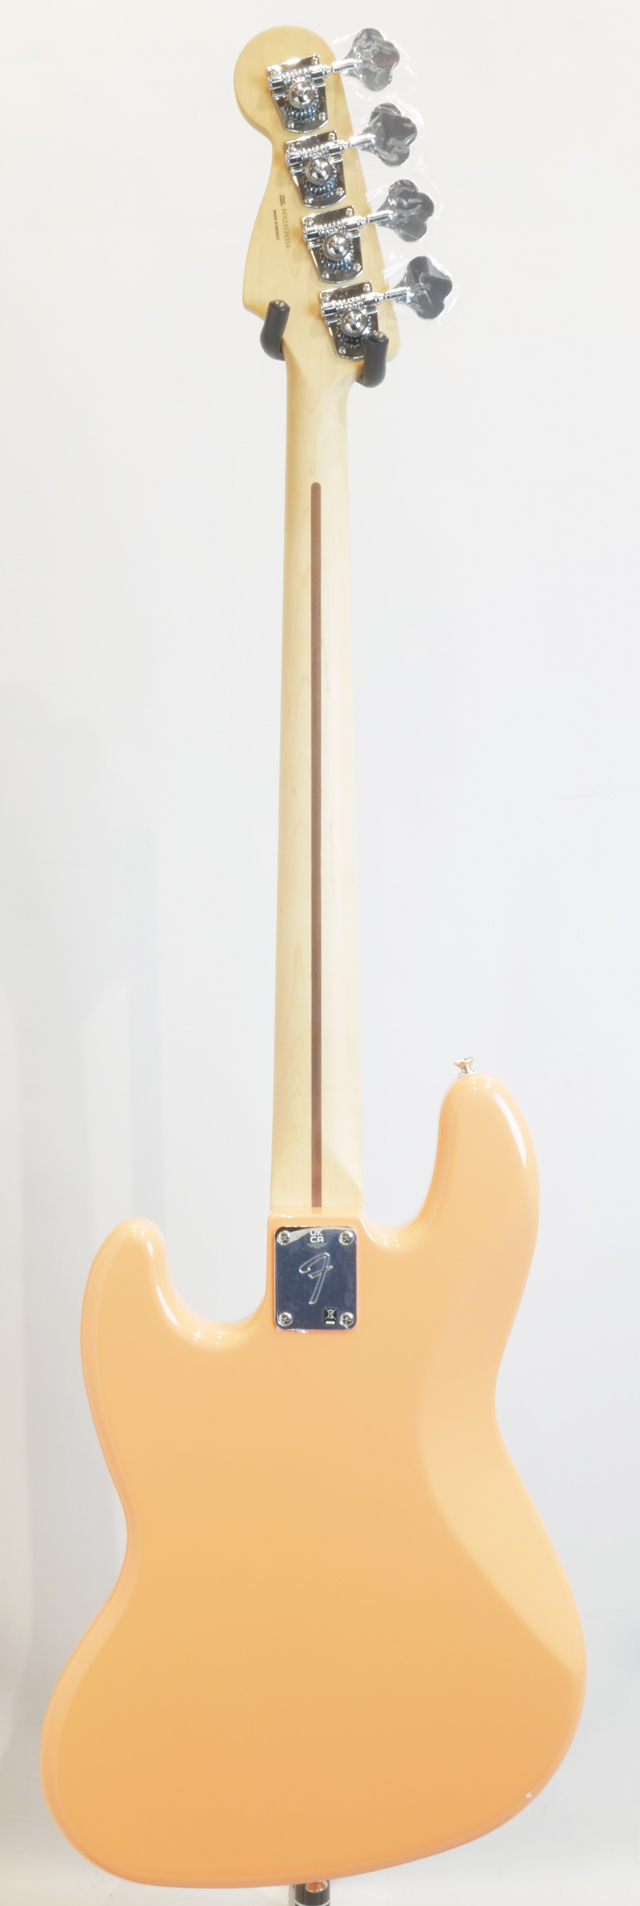 FENDER/MEXICO LIMITED EDITION PLAYER JAZZ BASS (Pacific Peach) フェンダー/メキシコ サブ画像3